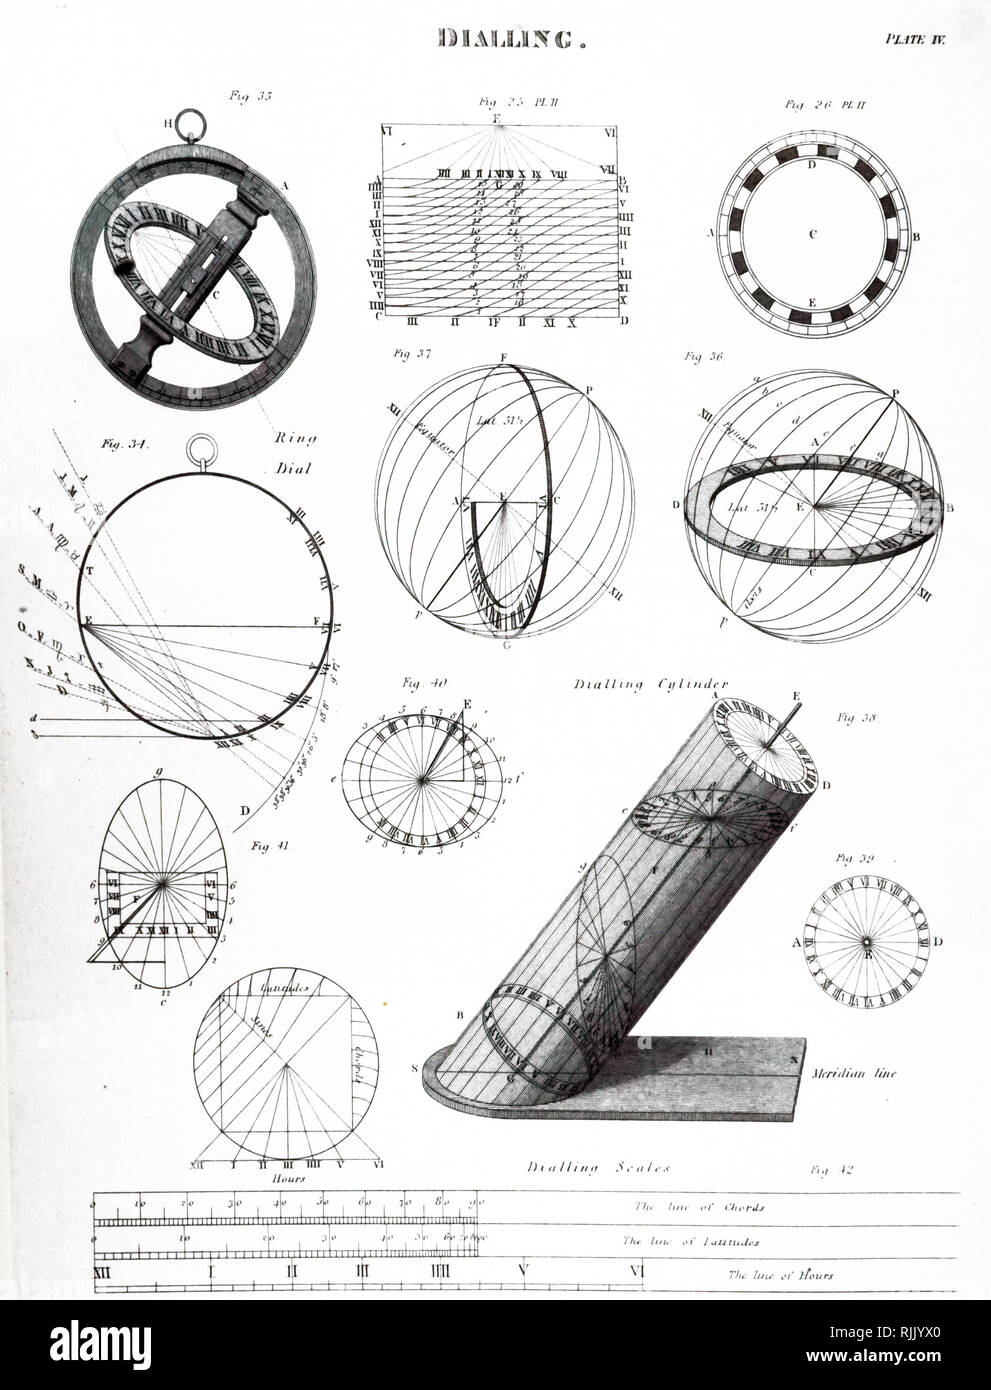 https://c8.alamy.com/comp/RJJYX0/an-engraving-depicting-various-forms-of-sundials-and-diagrams-for-calculating-the-engraved-scales-dated-19th-century-RJJYX0.jpg